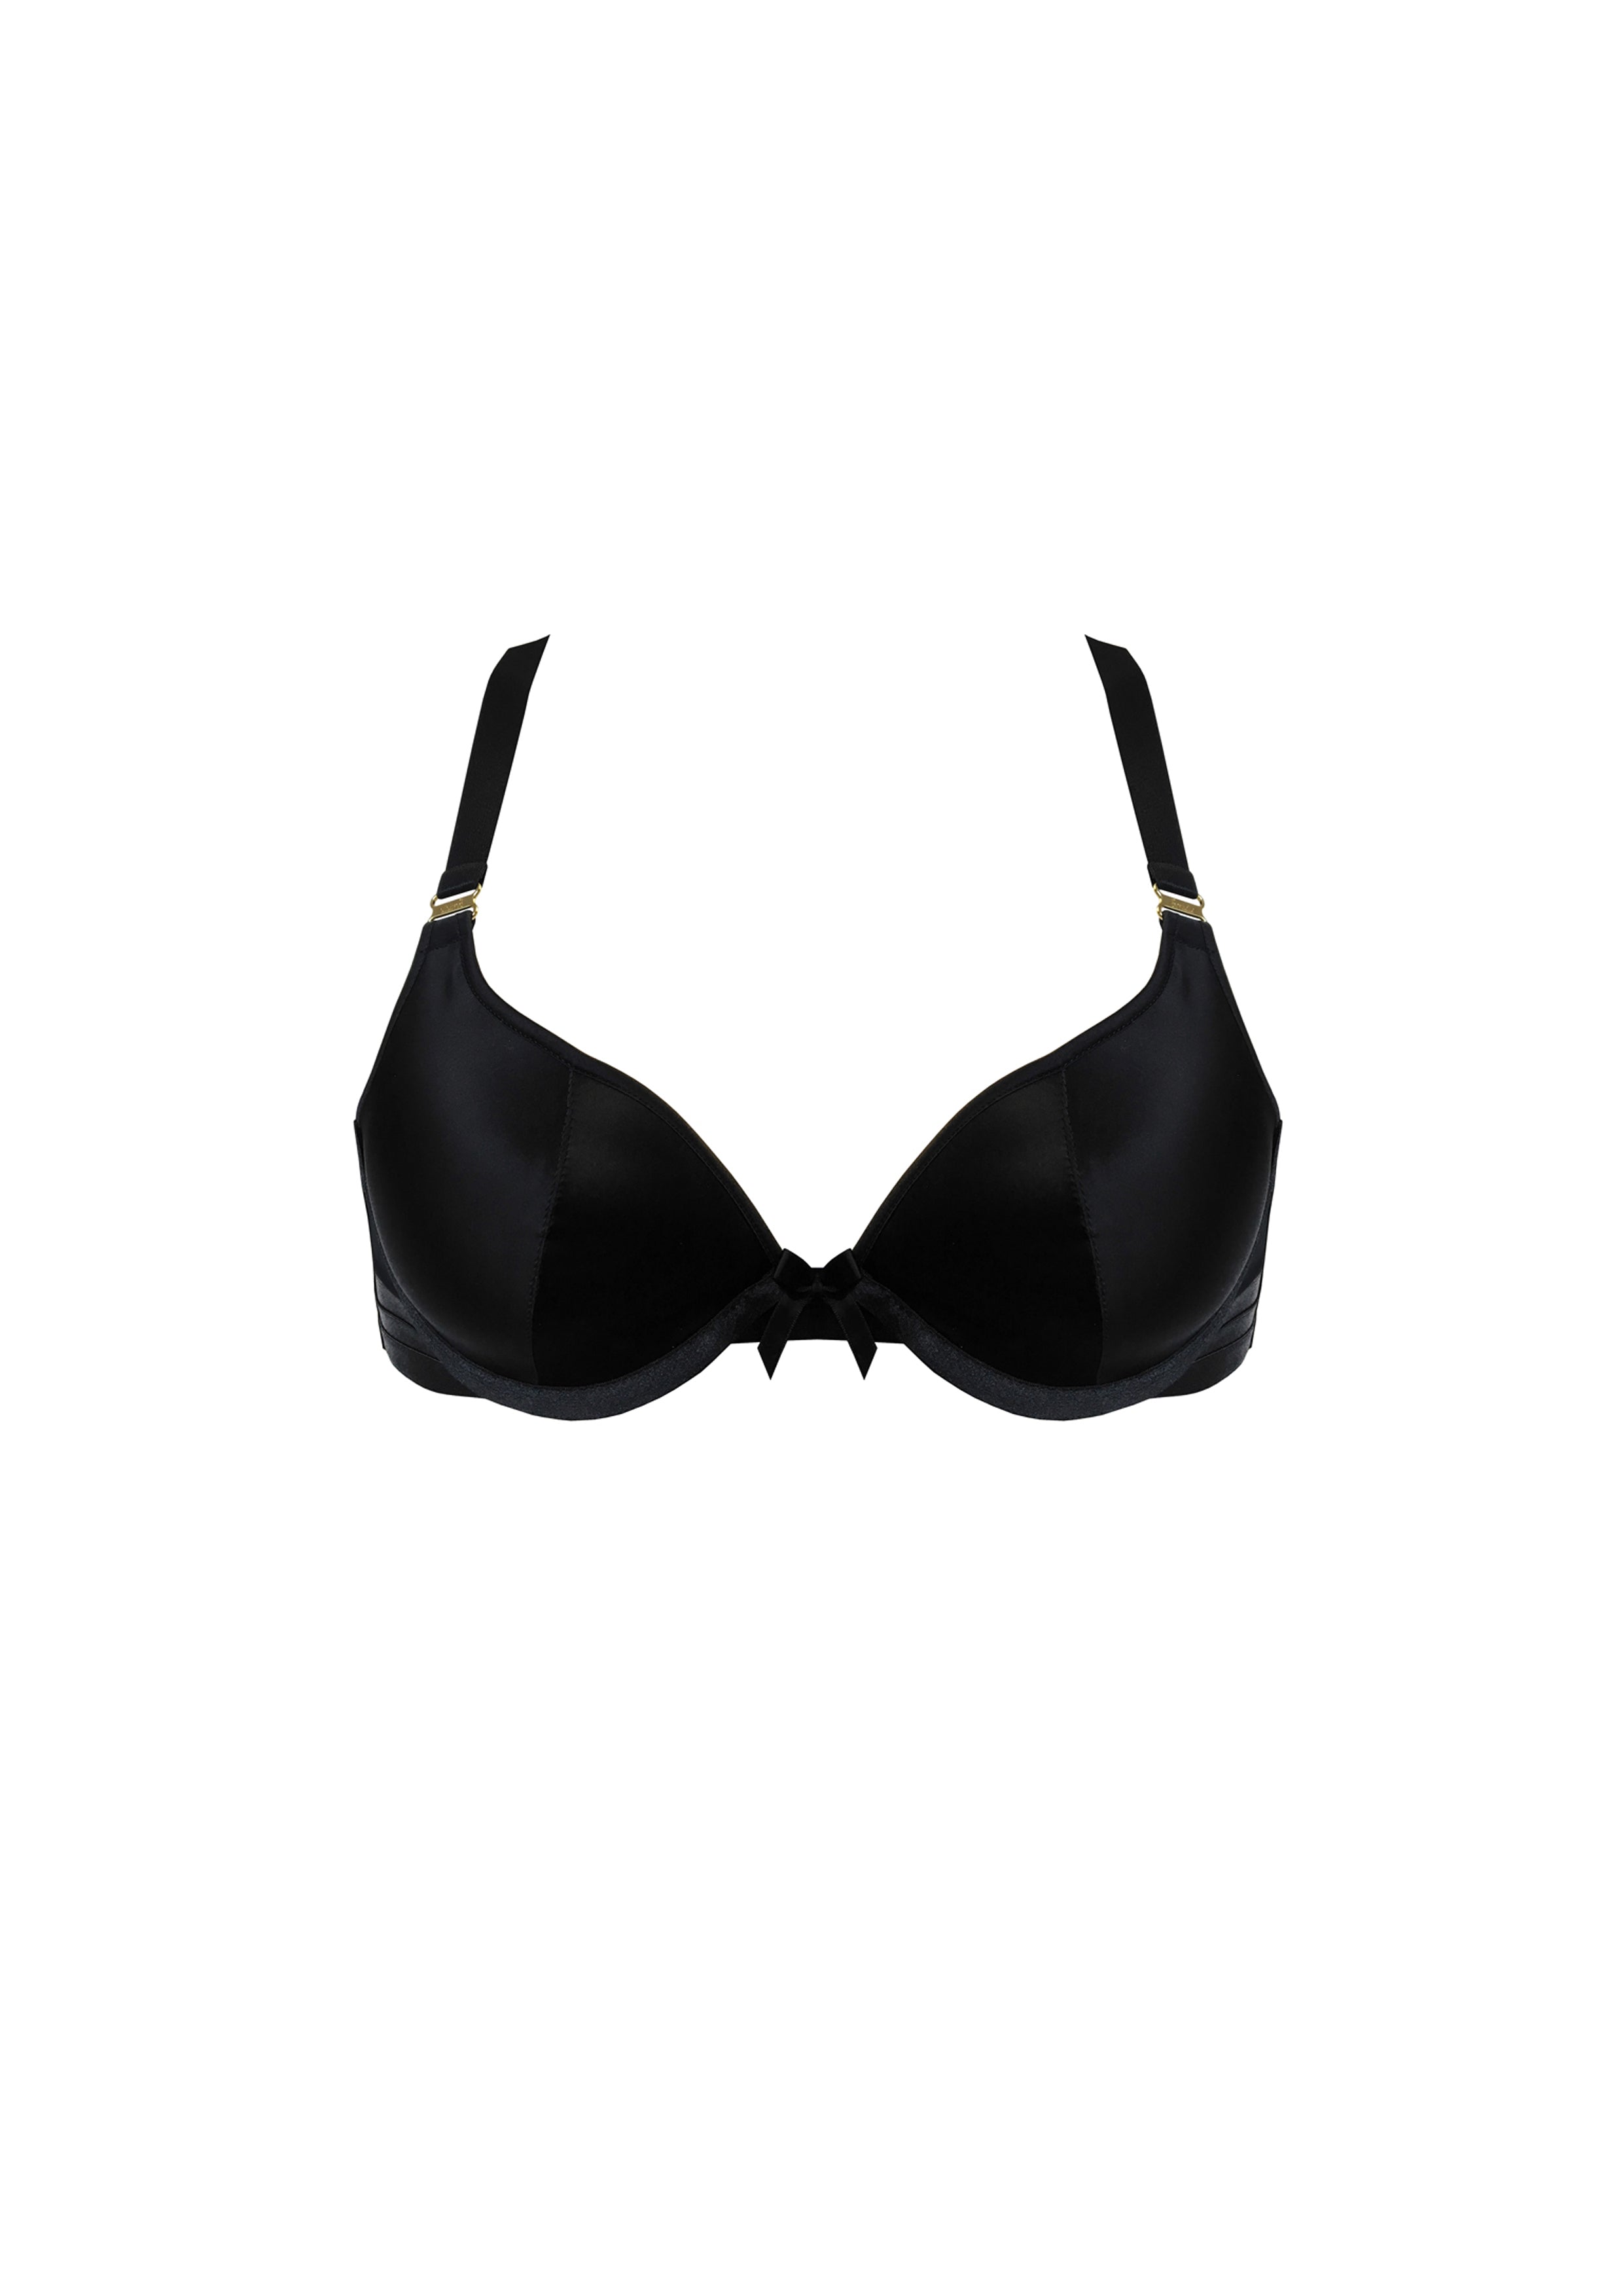 Black PU Leather Bras for Women Sexy Push Up Bra Plus Size Gothic Lingerie  Underwear Sports Bra with Non Removable Pads at  Women's Clothing  store